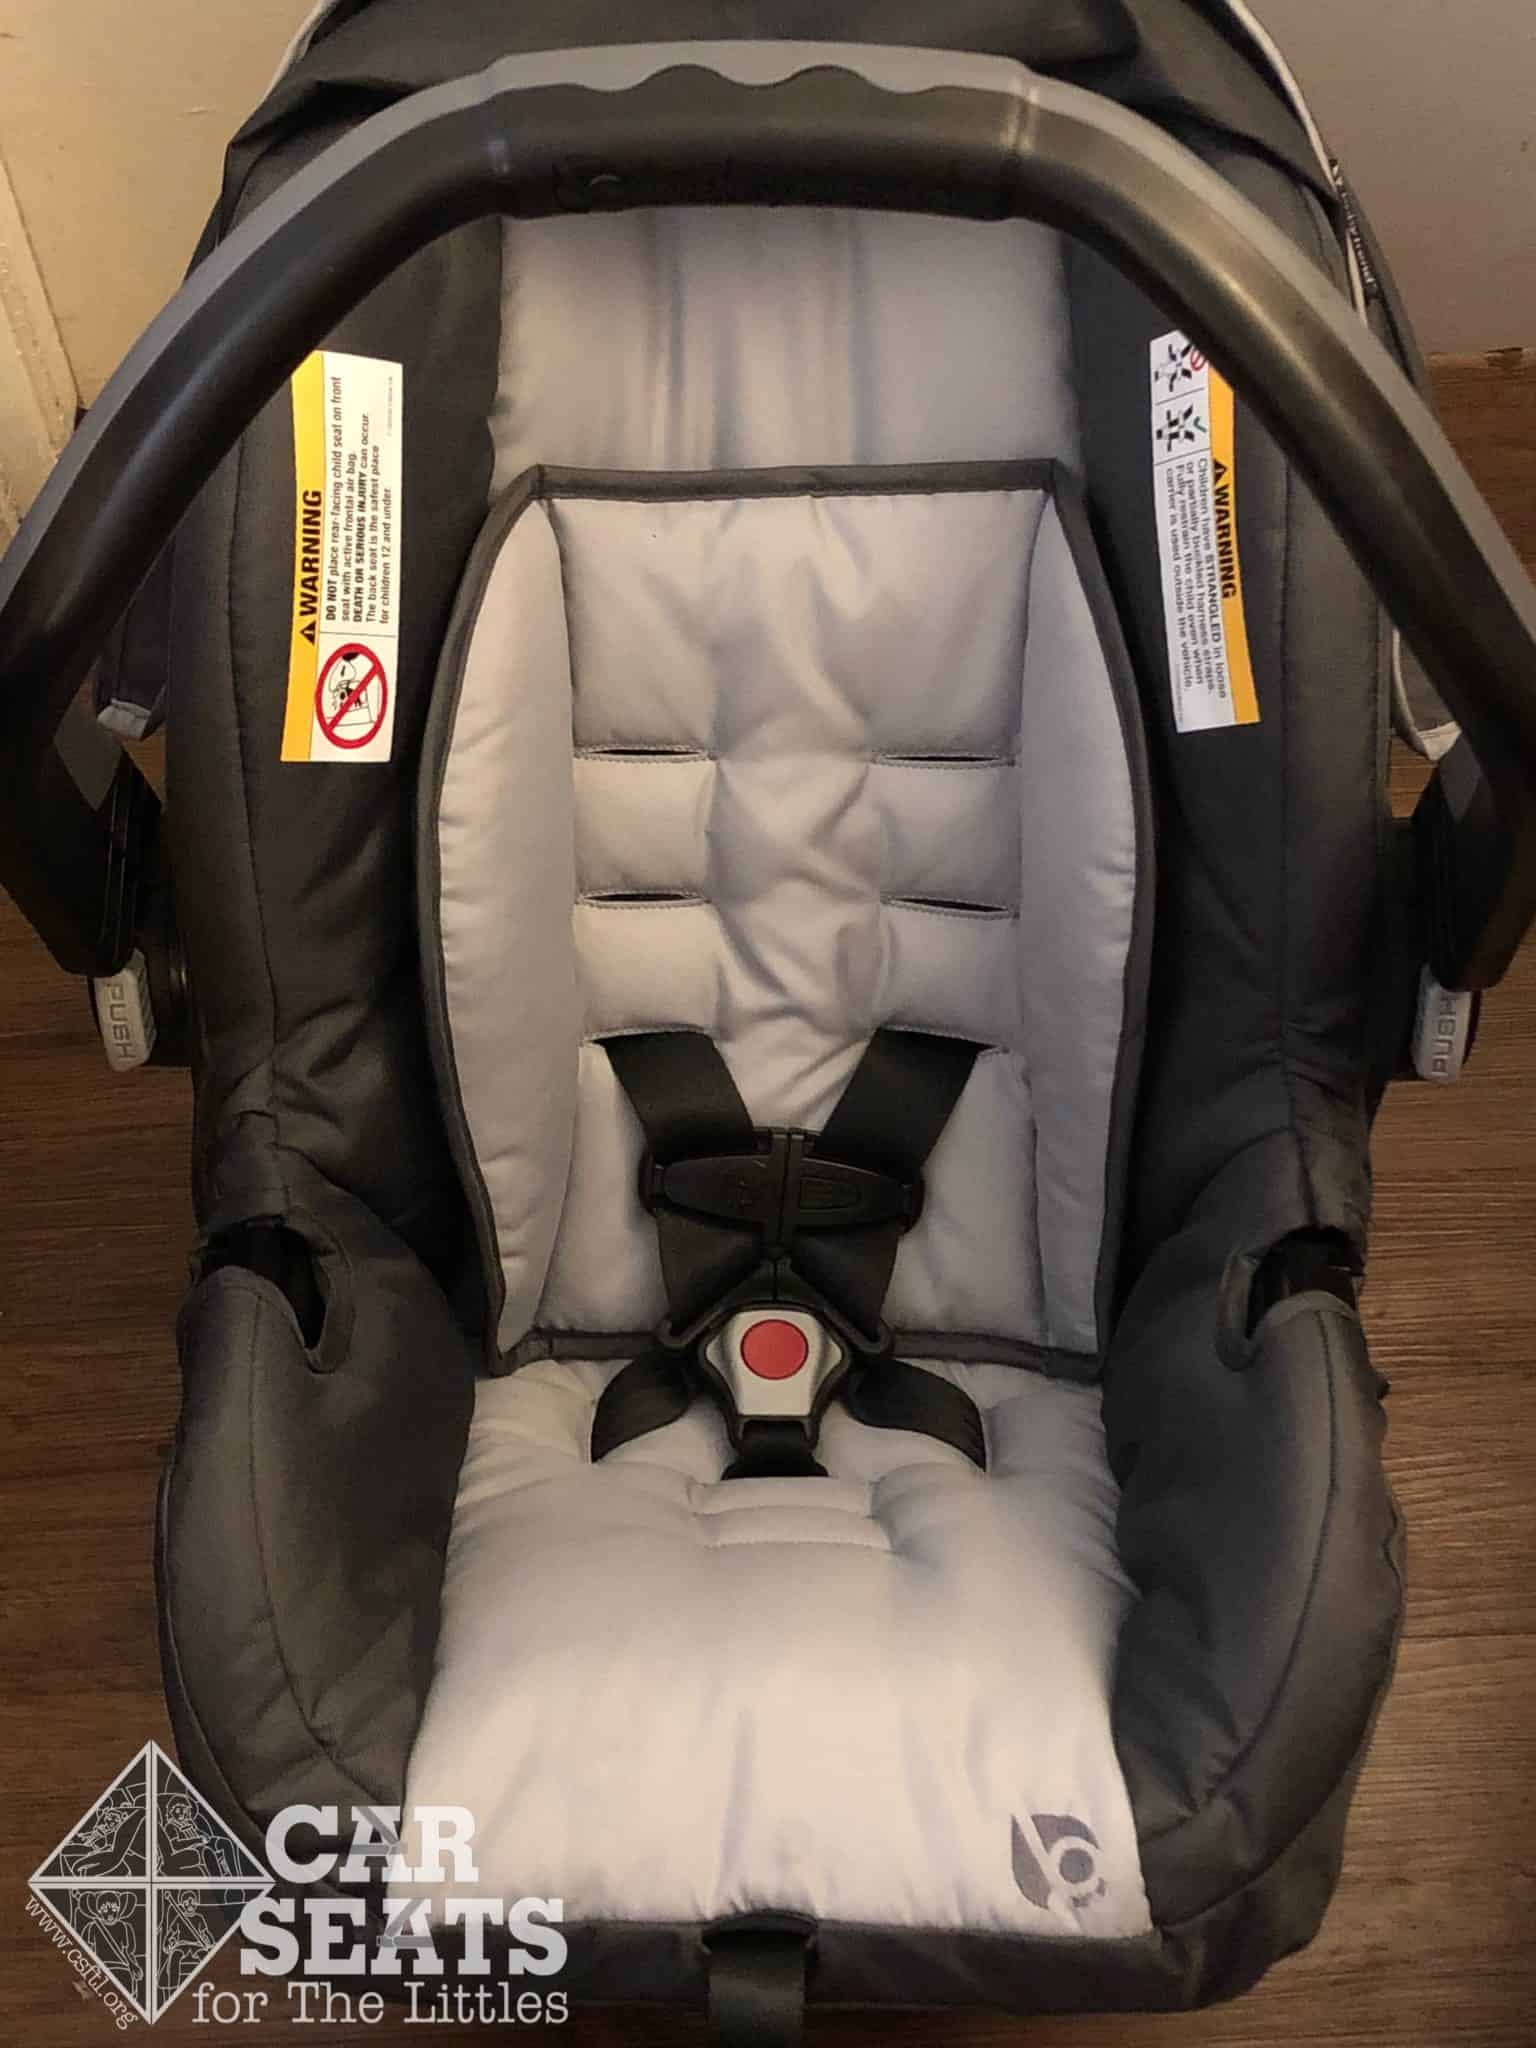 Baby Trend Car Seat Safety Carnawall Com - Are Baby Trend Car Seats Safe